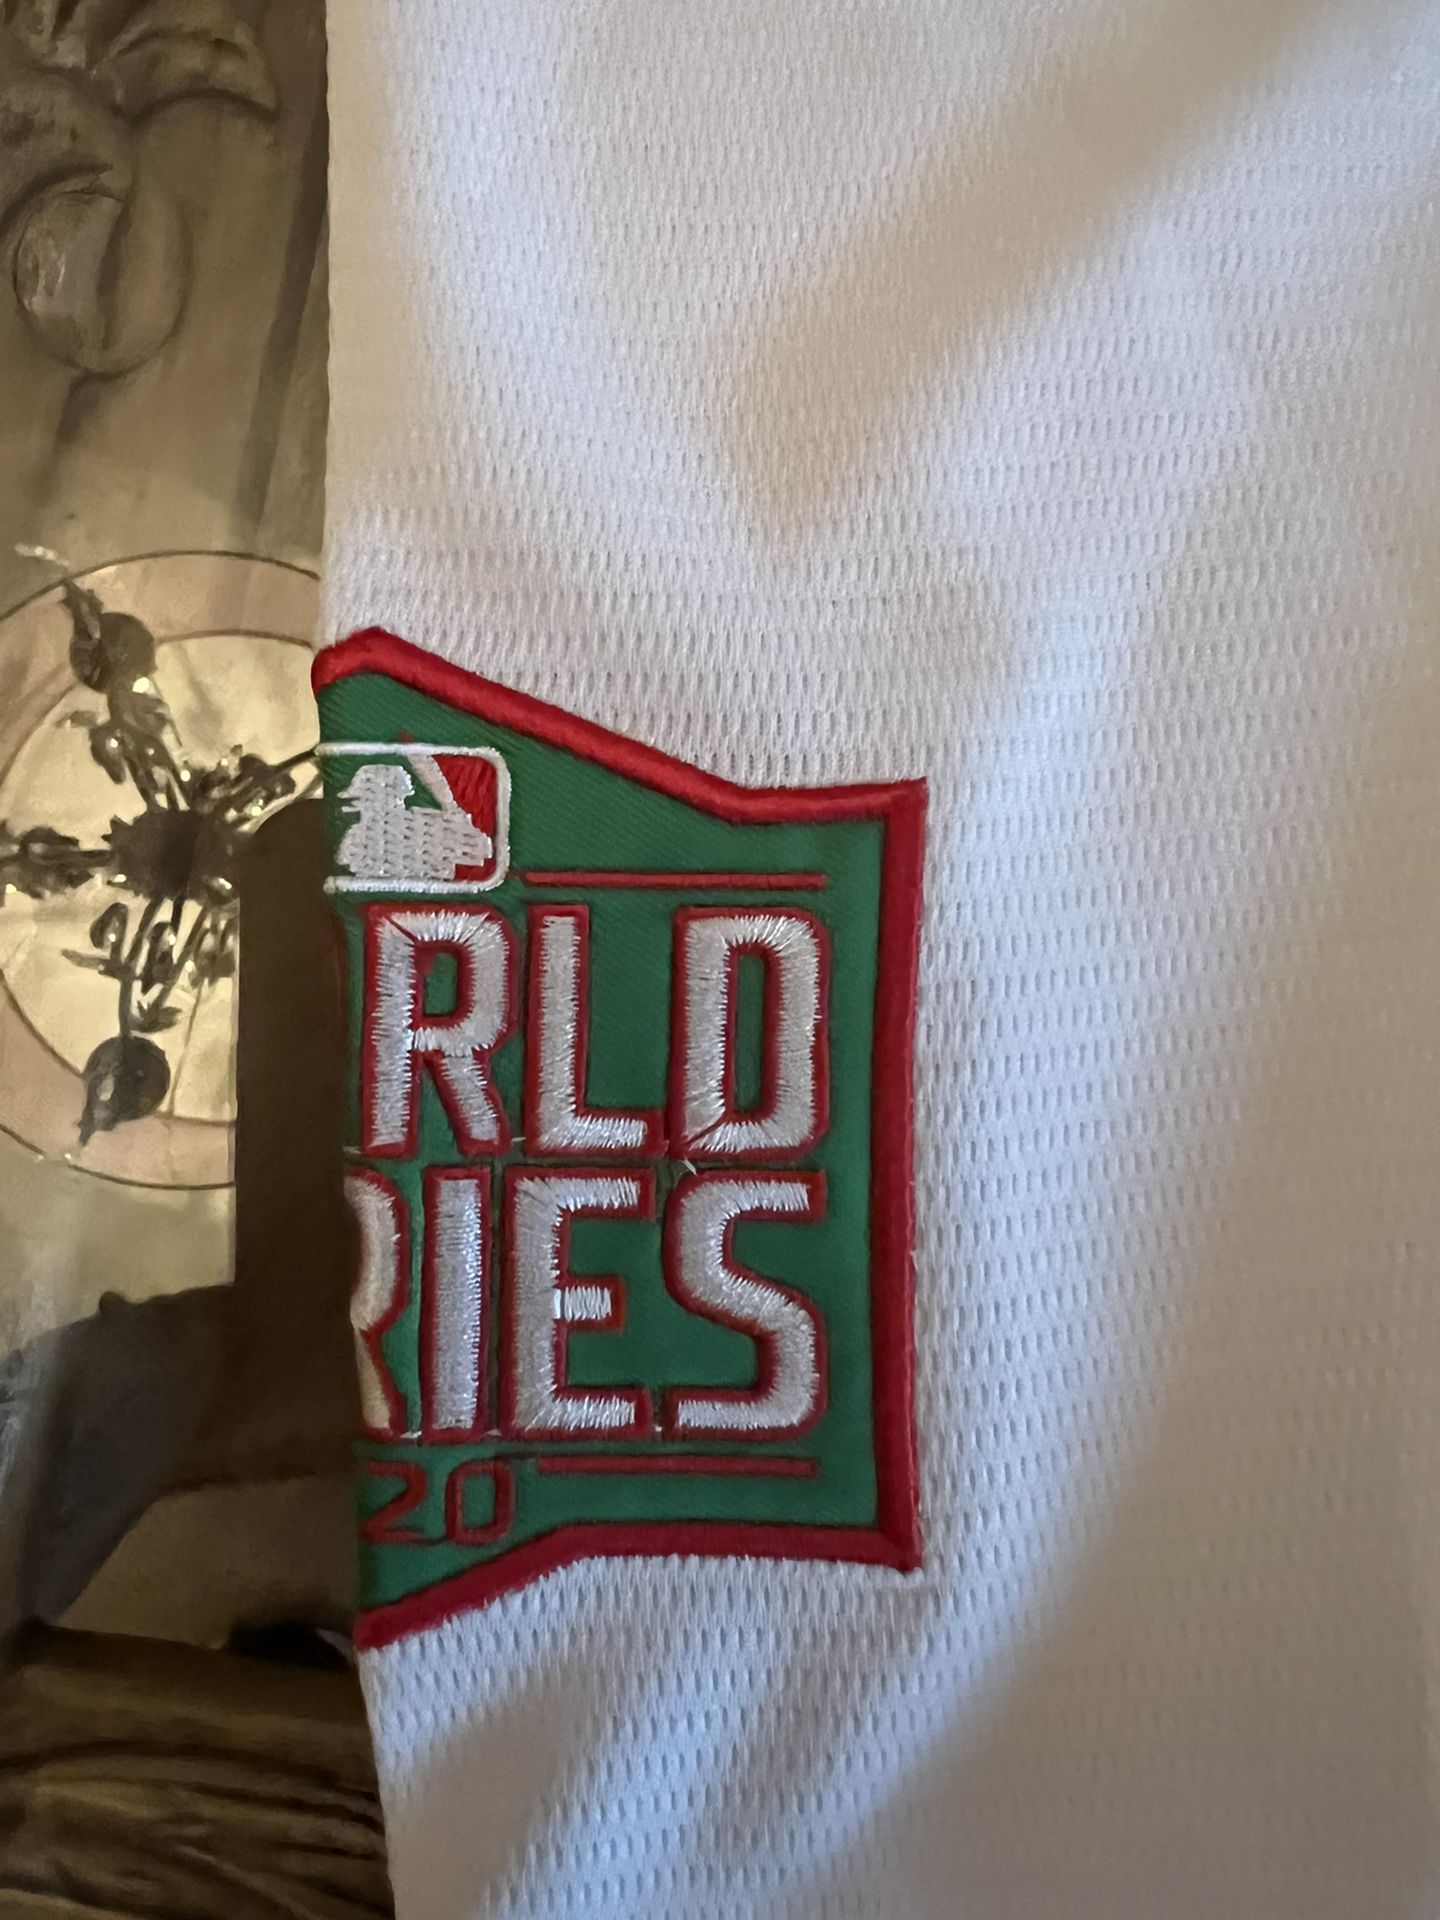 Dodgers 7 Urias Baseball Jersey - Small.2X.3X for Sale in Long Beach, CA -  OfferUp